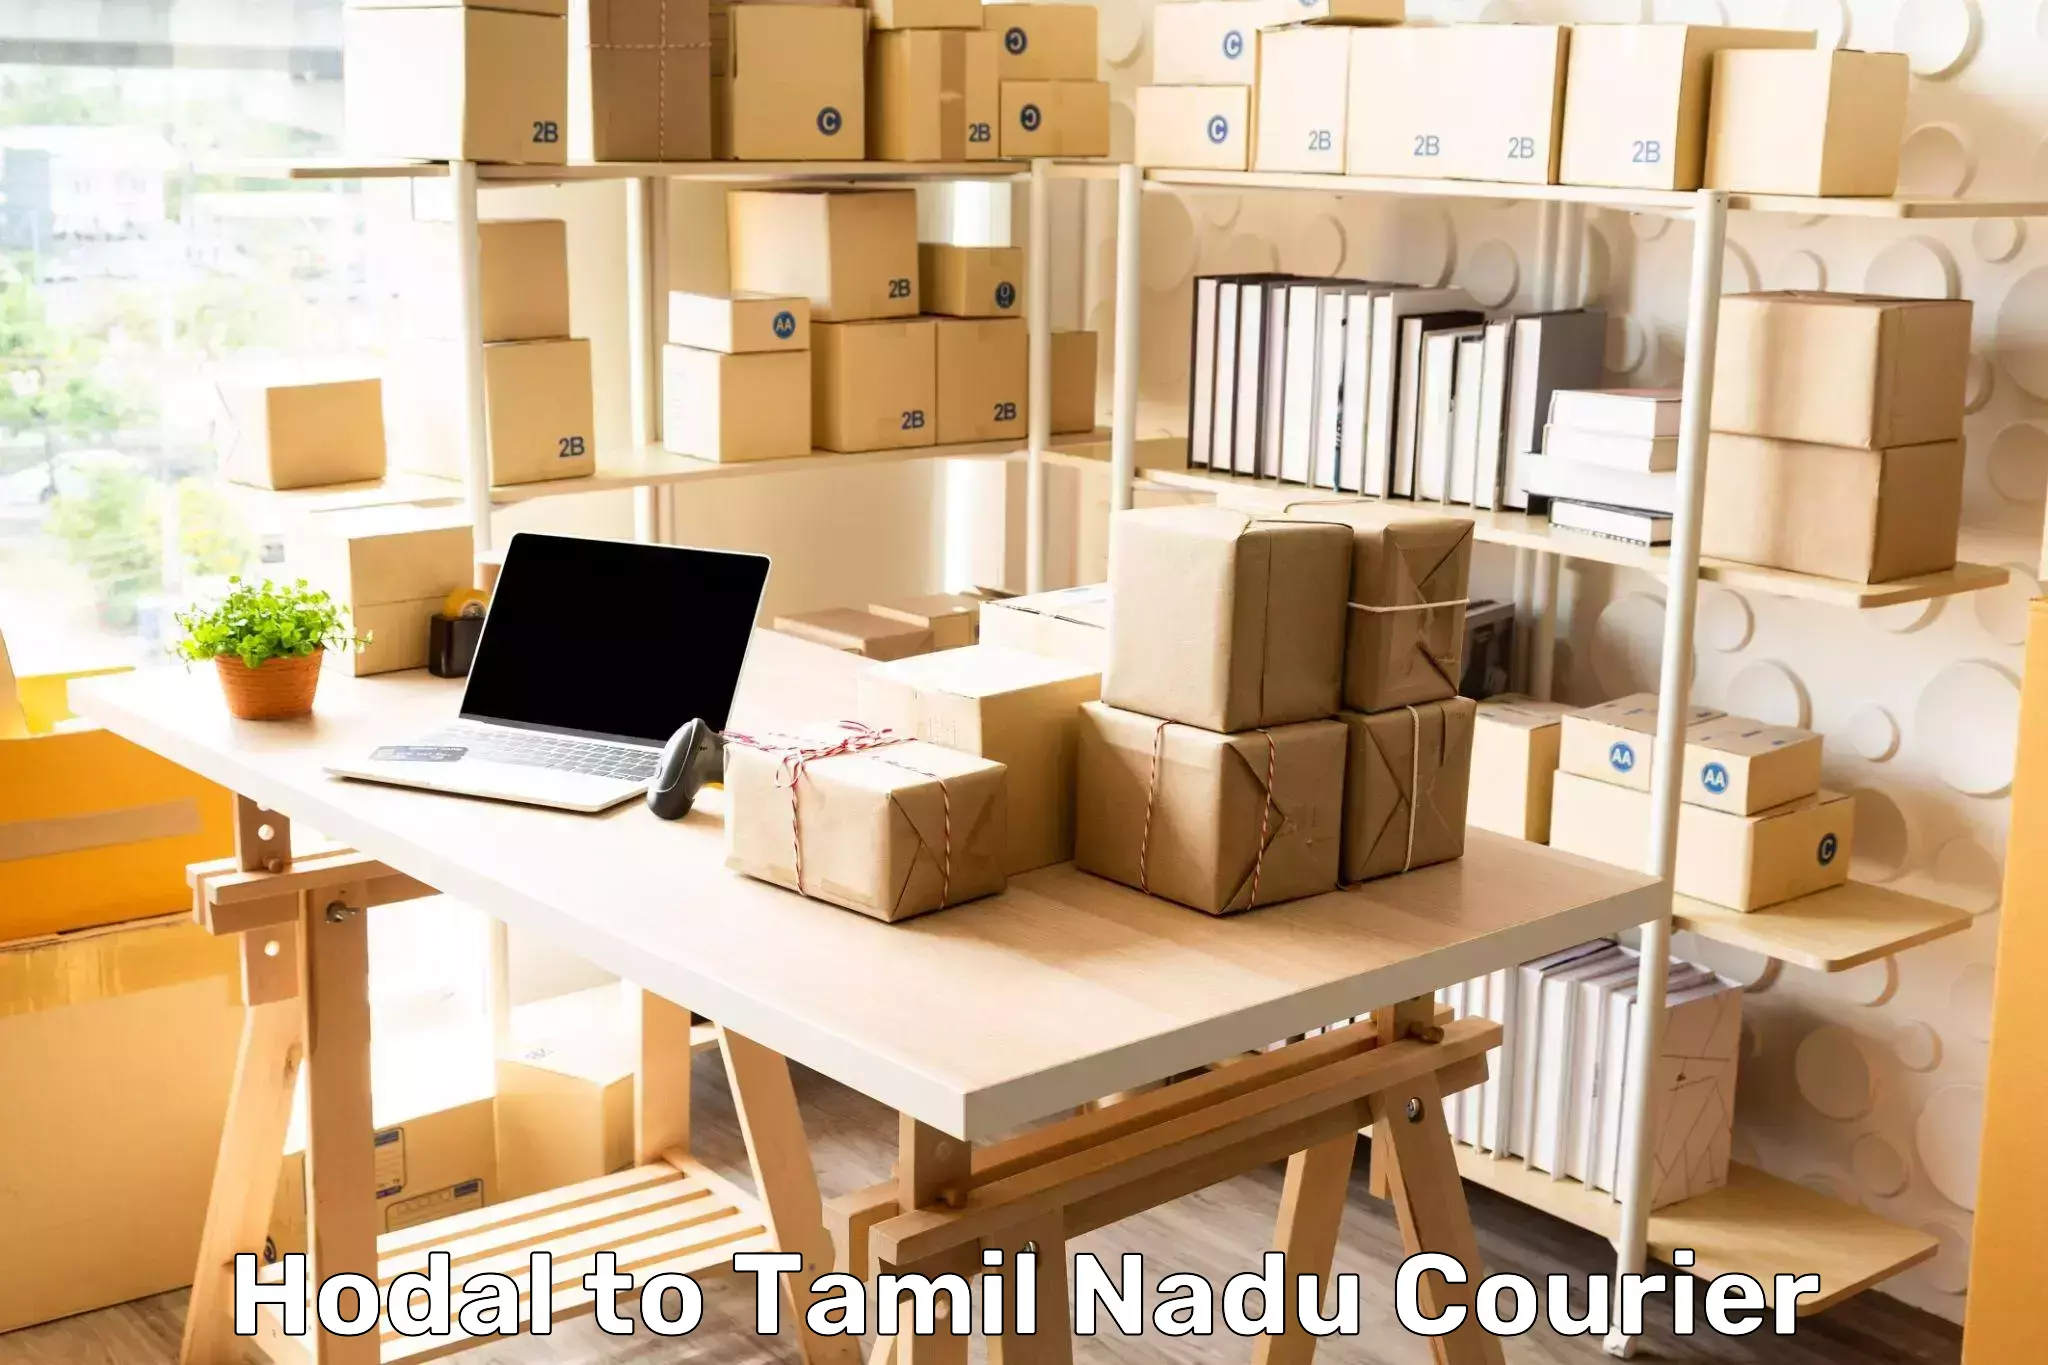 Courier service innovation Hodal to Sri Ramachandra Institute of Higher Education and Research Chennai